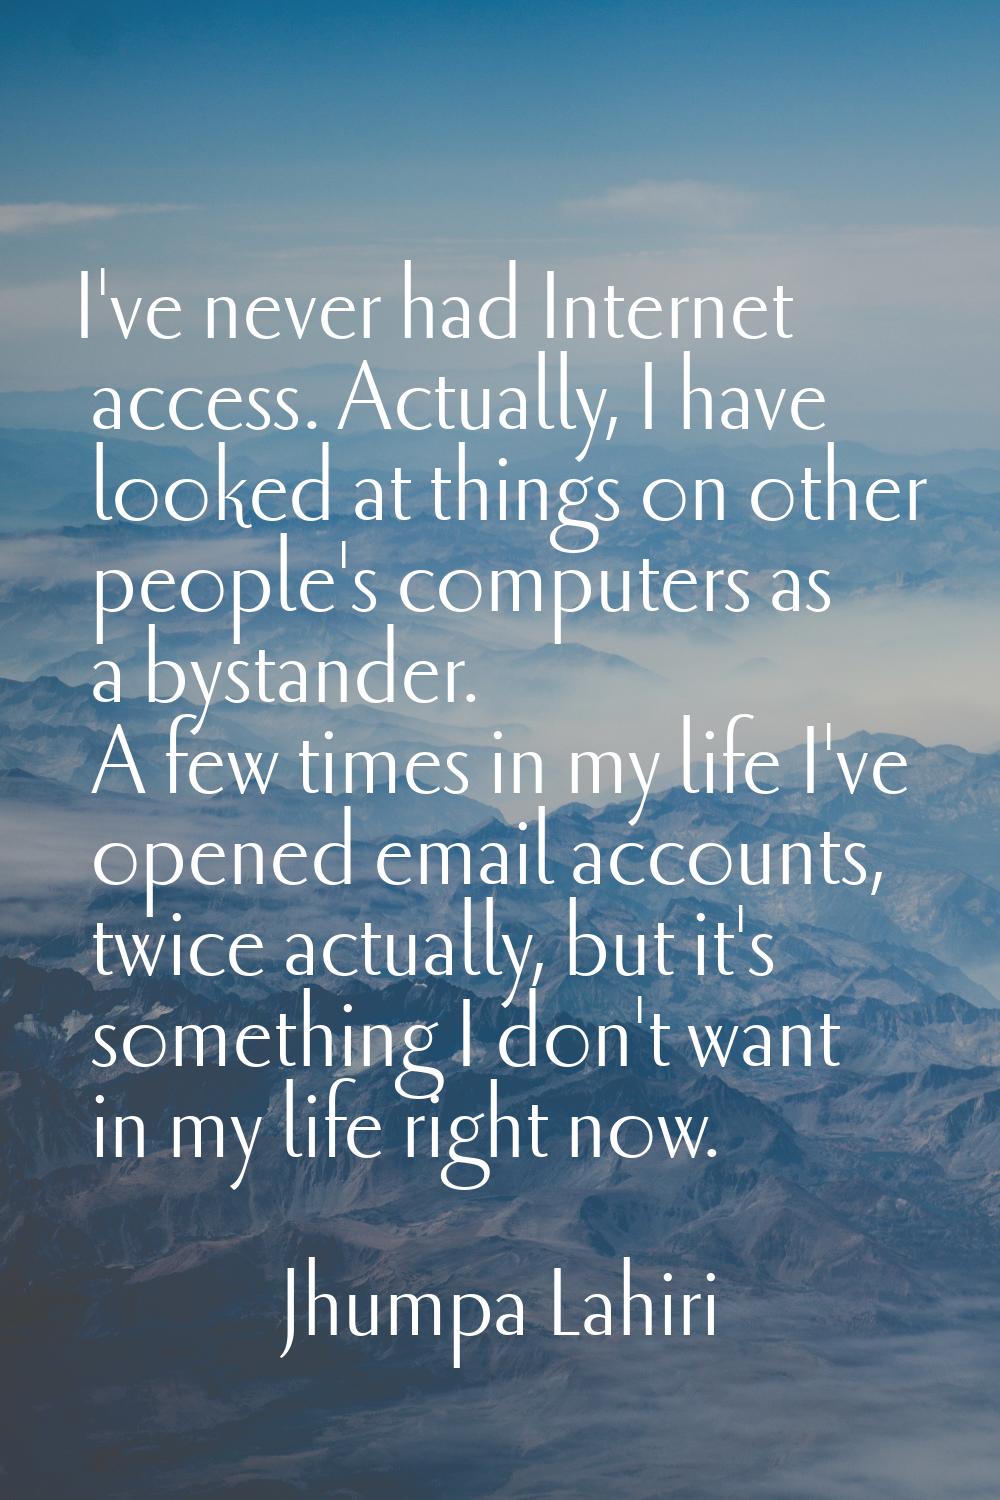 I've never had Internet access. Actually, I have looked at things on other people's computers as a 